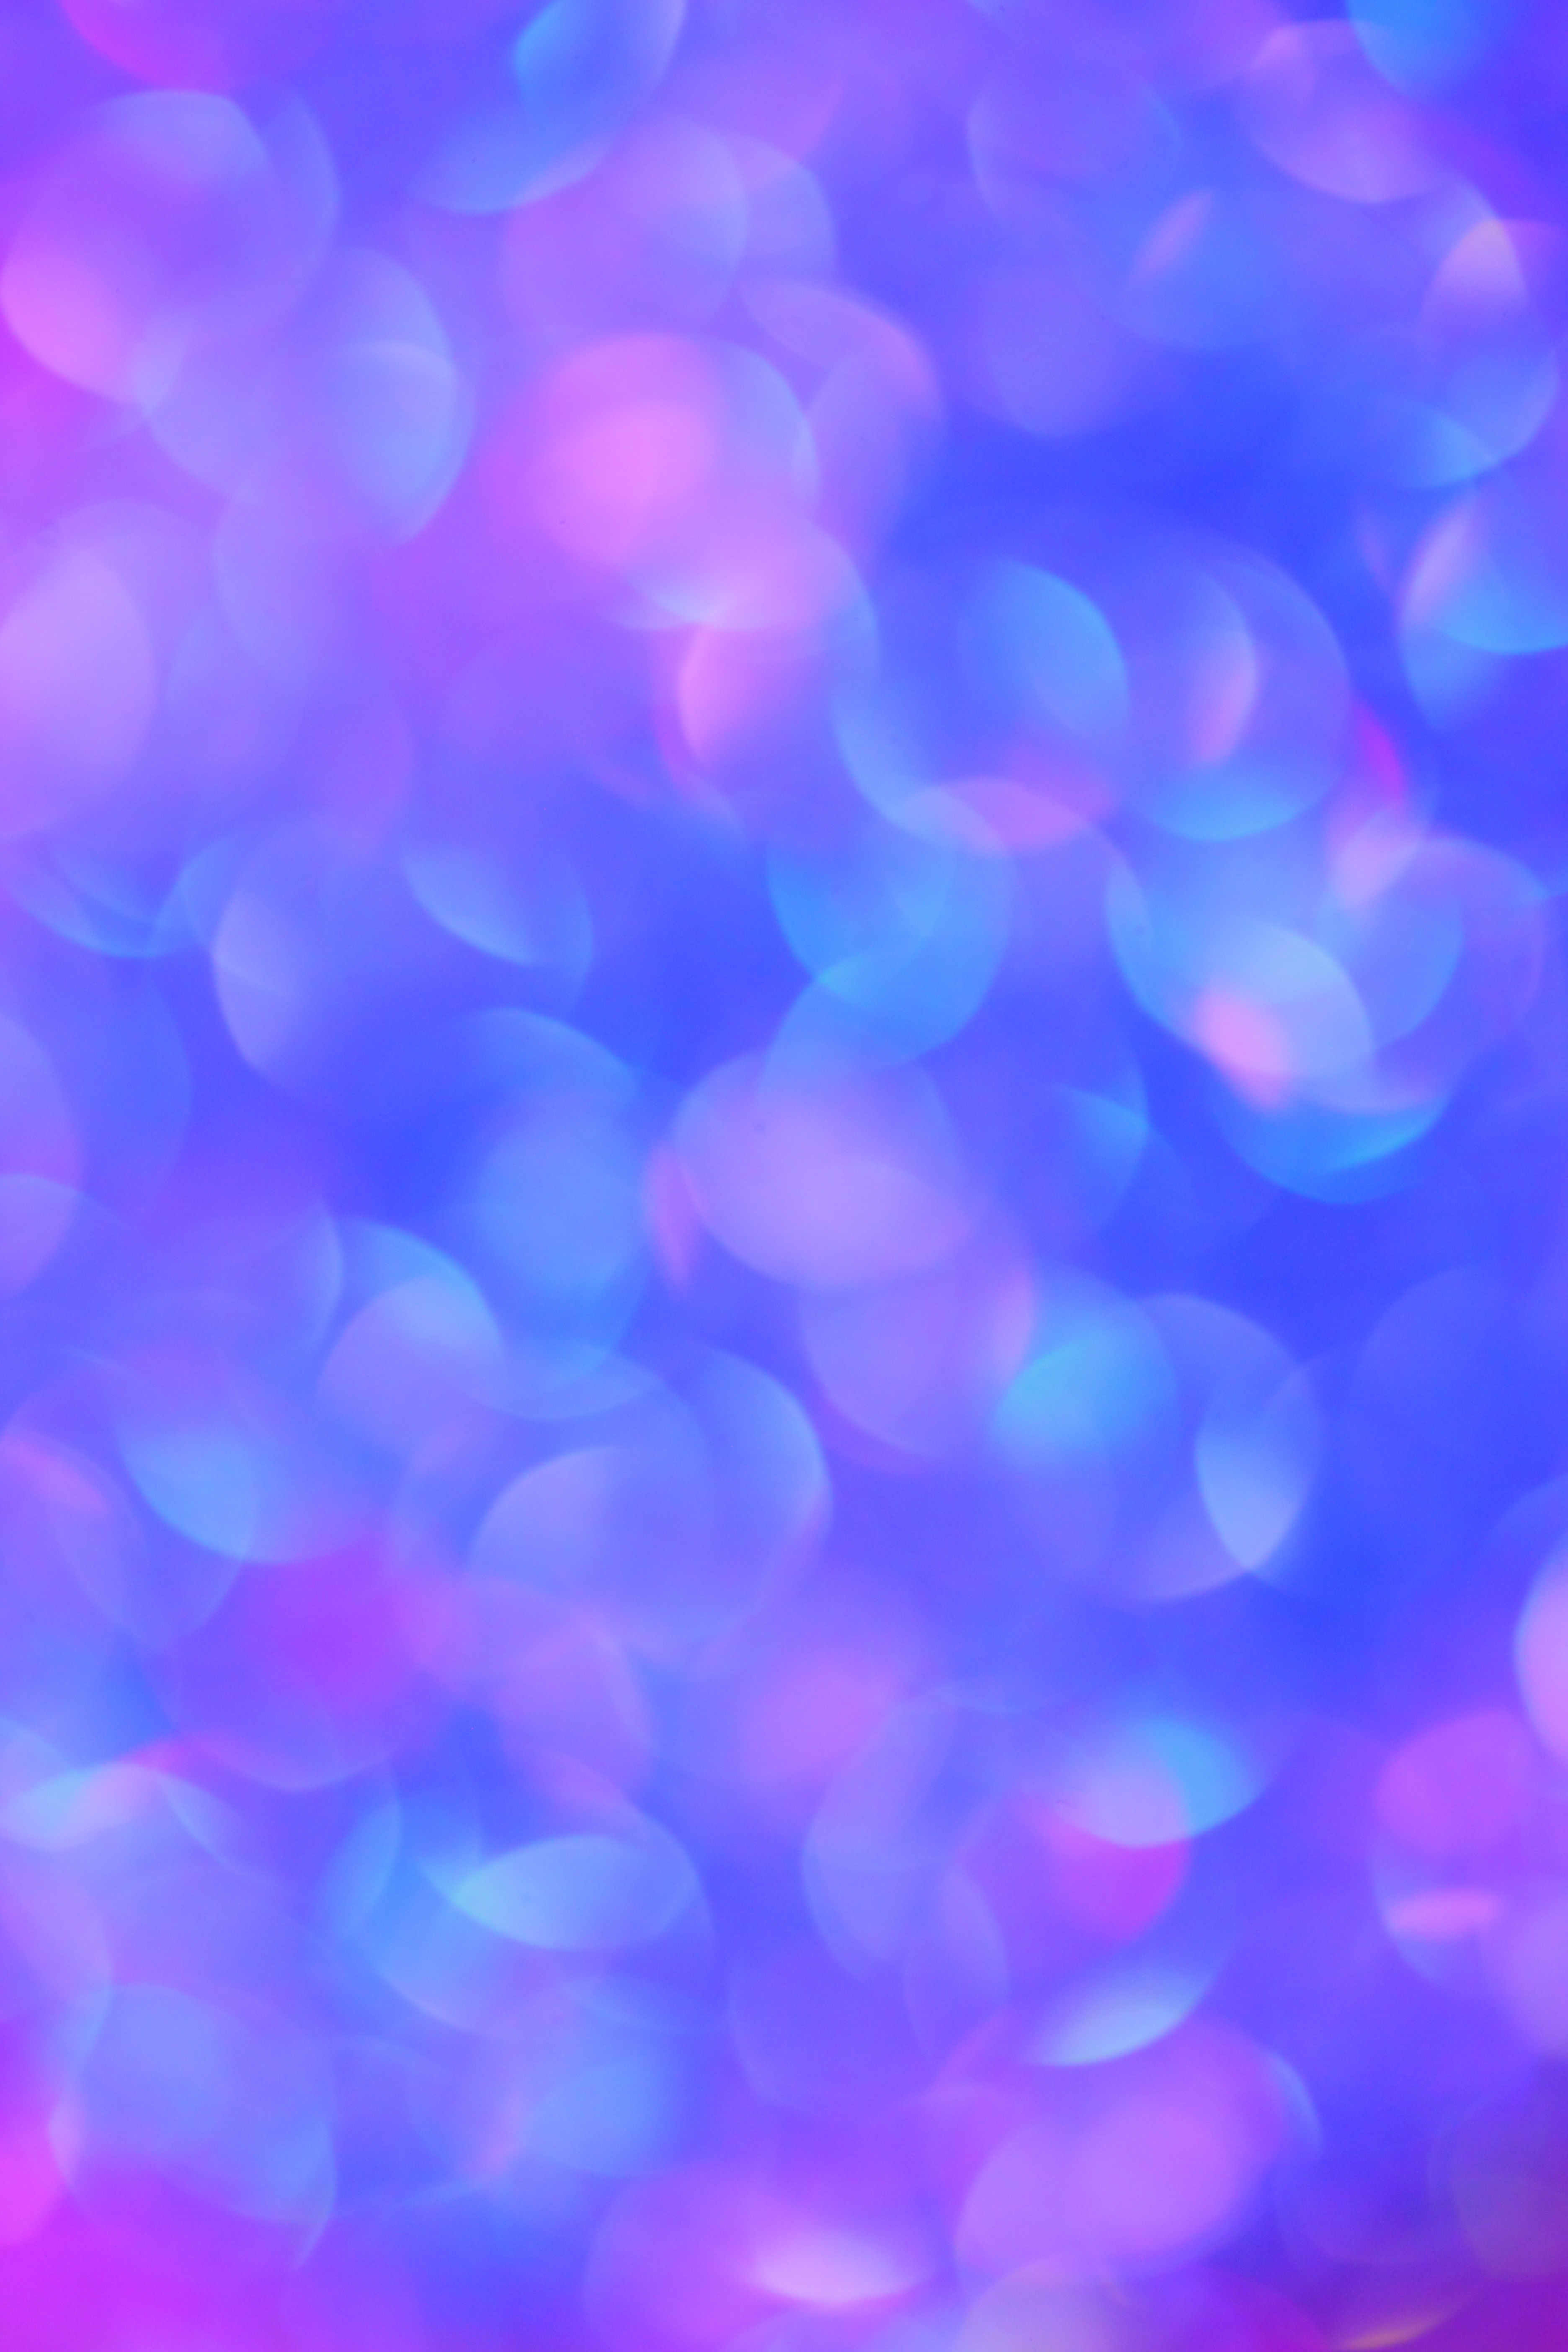 58202 free download Blue wallpapers for phone, bokeh, shine, glare, brilliance Blue images and screensavers for mobile